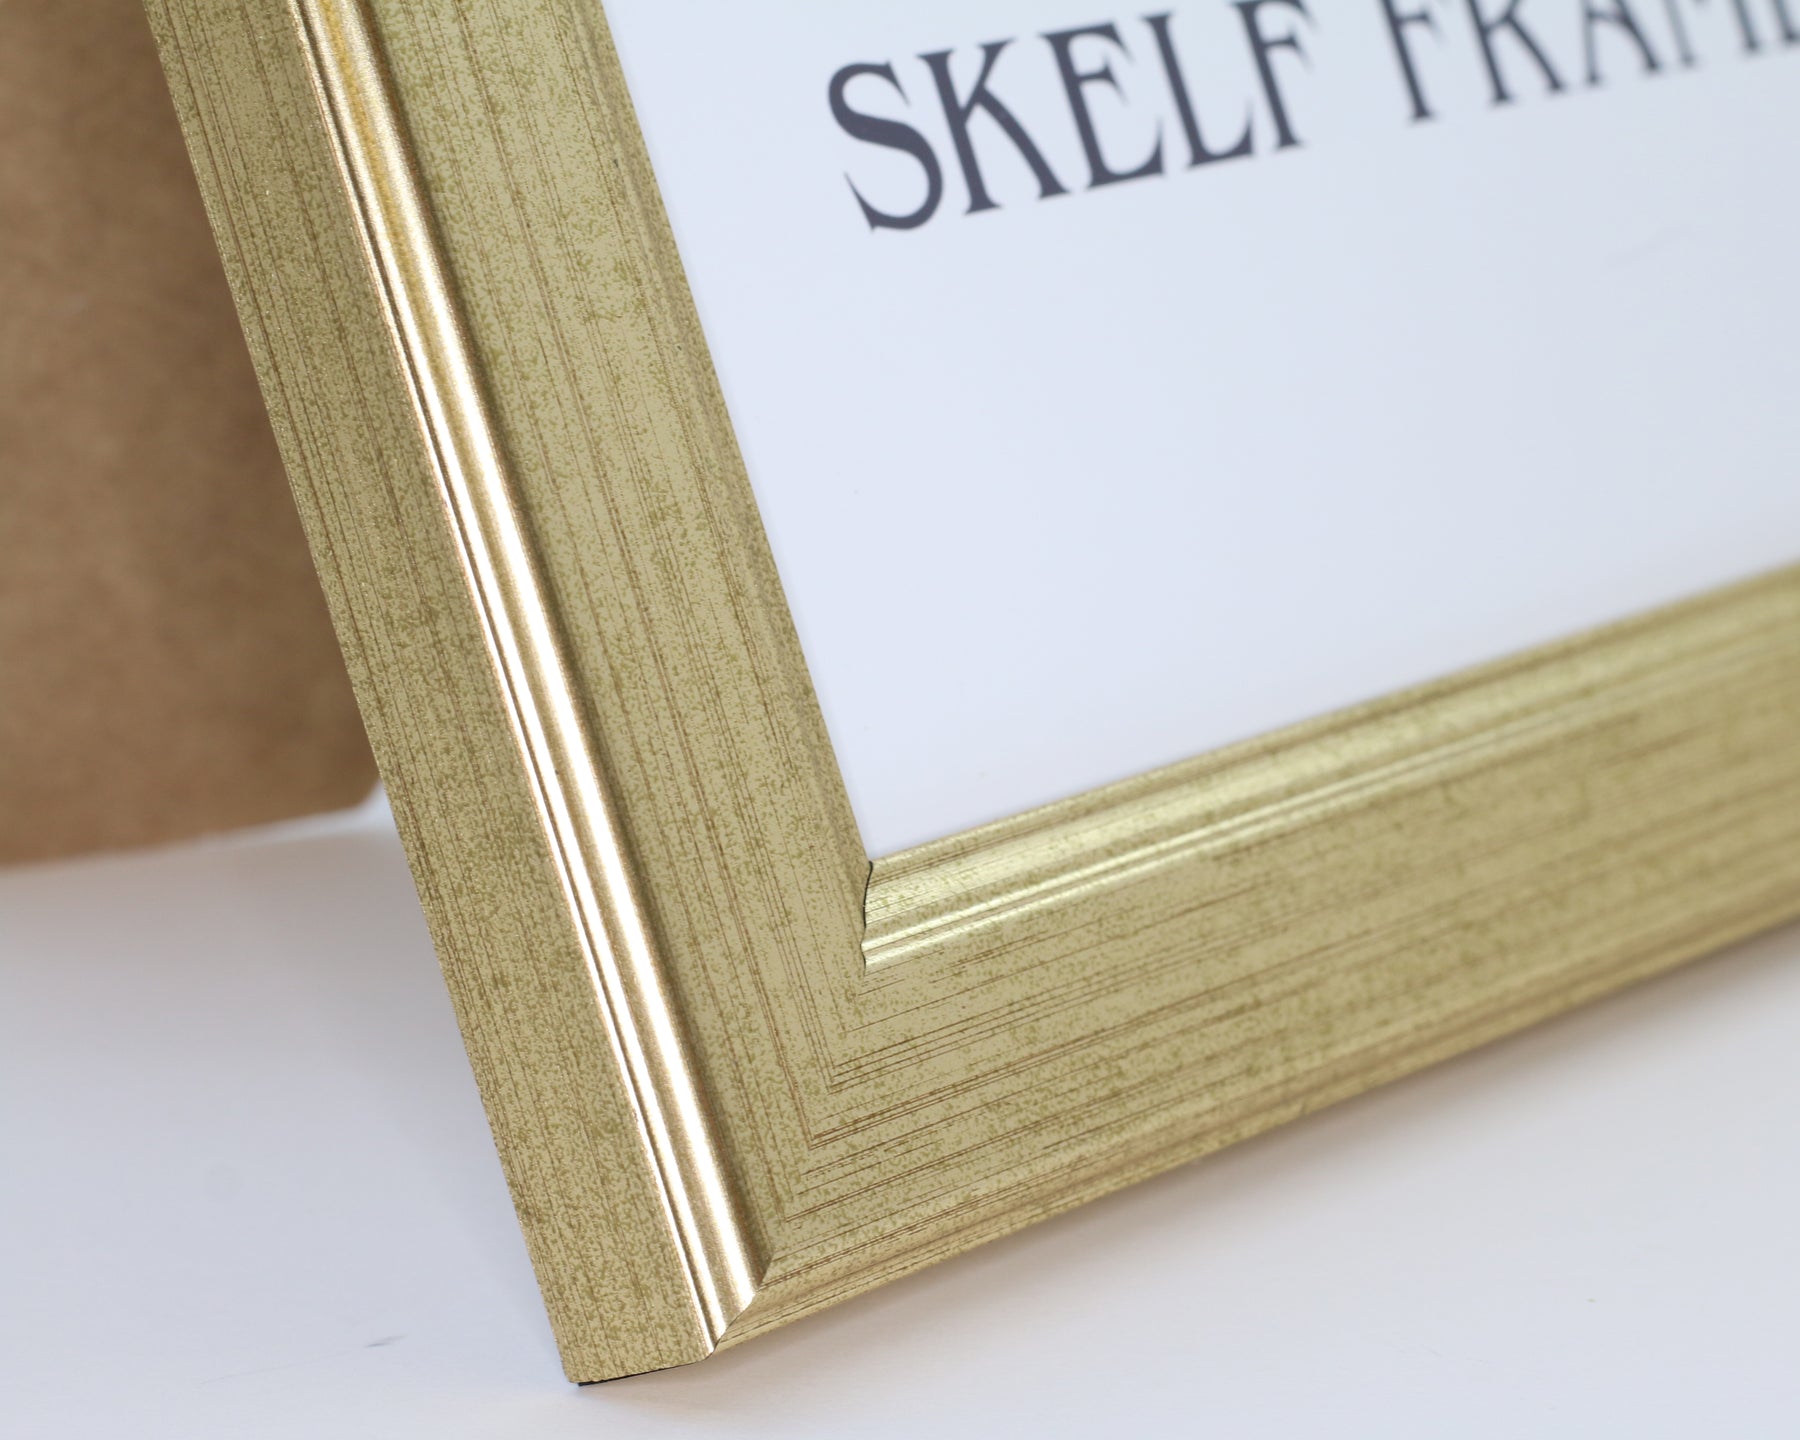 Champagne Gold Frame - Metric